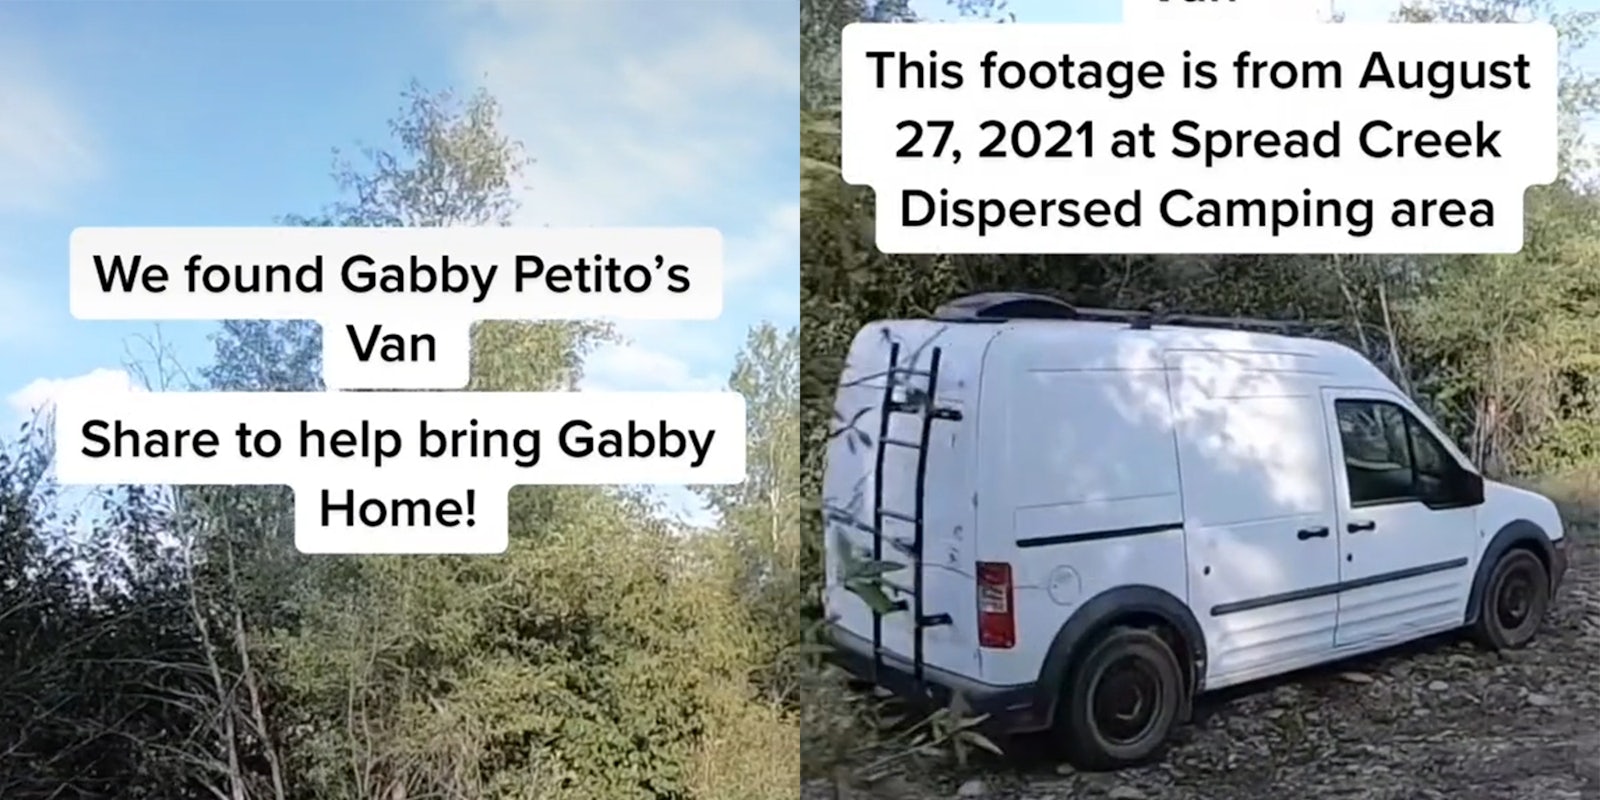 white van in forest with captions 'We found Gabby Petito's Van. Share to help bring Gabby Home!' and 'This footage is from August 27, 2021 at Spread Creek Dispersed Camping Area'